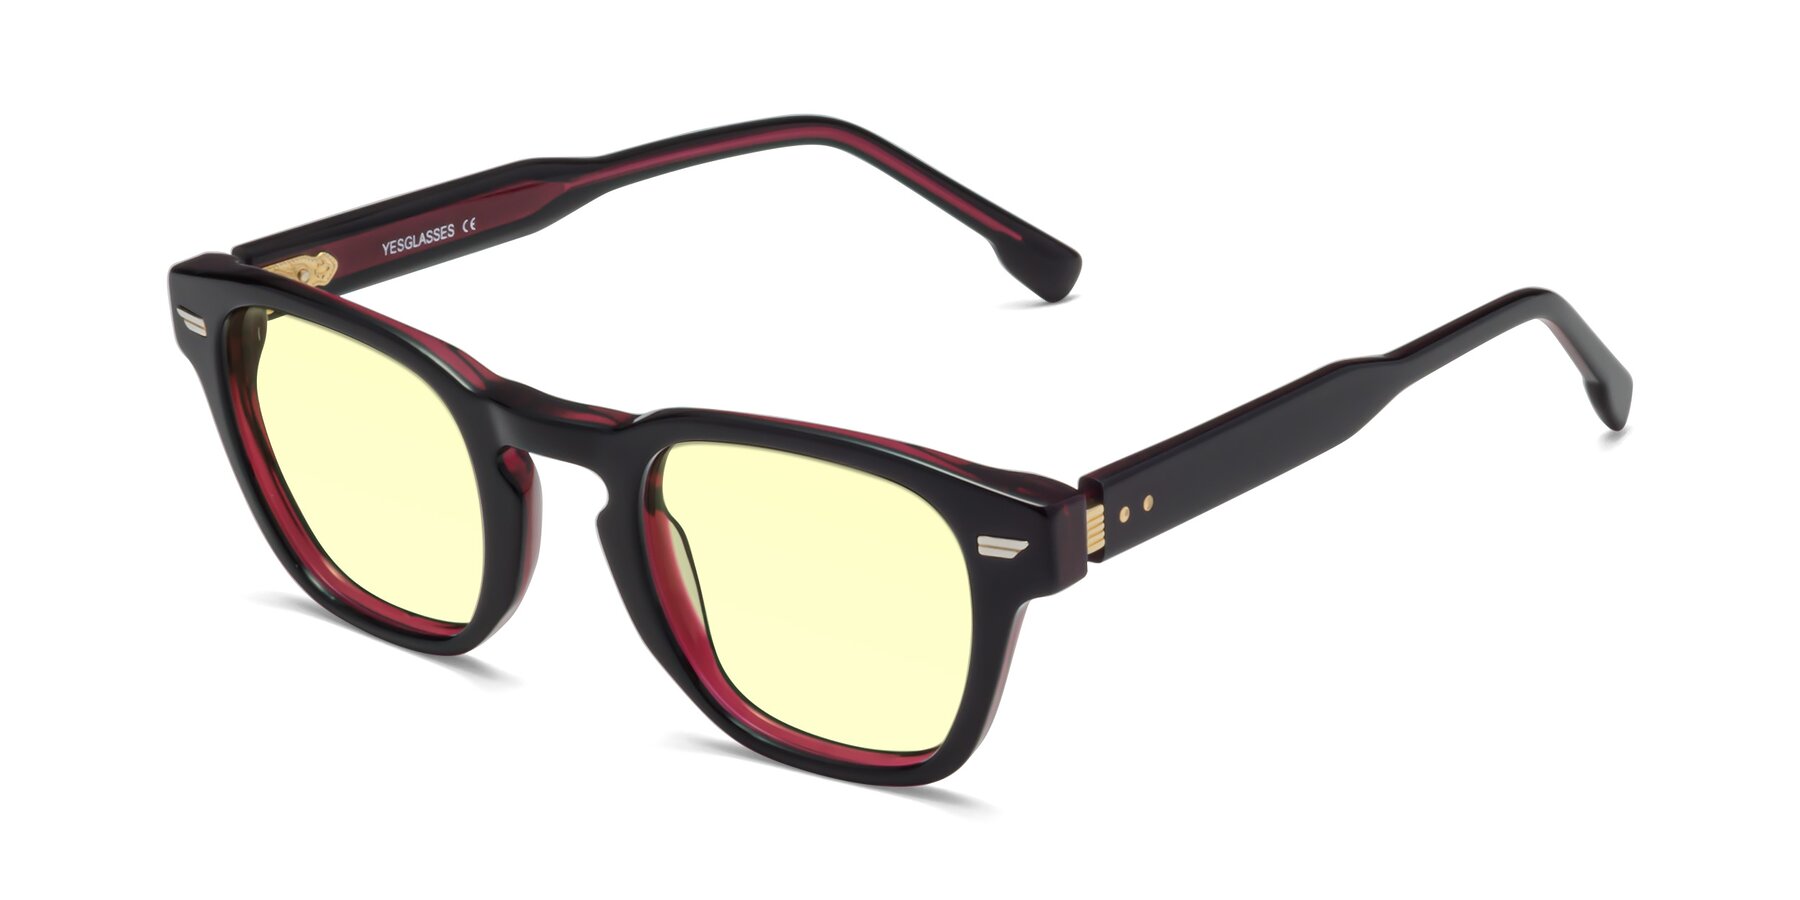 Angle of 1421 in Black-Wine with Light Yellow Tinted Lenses